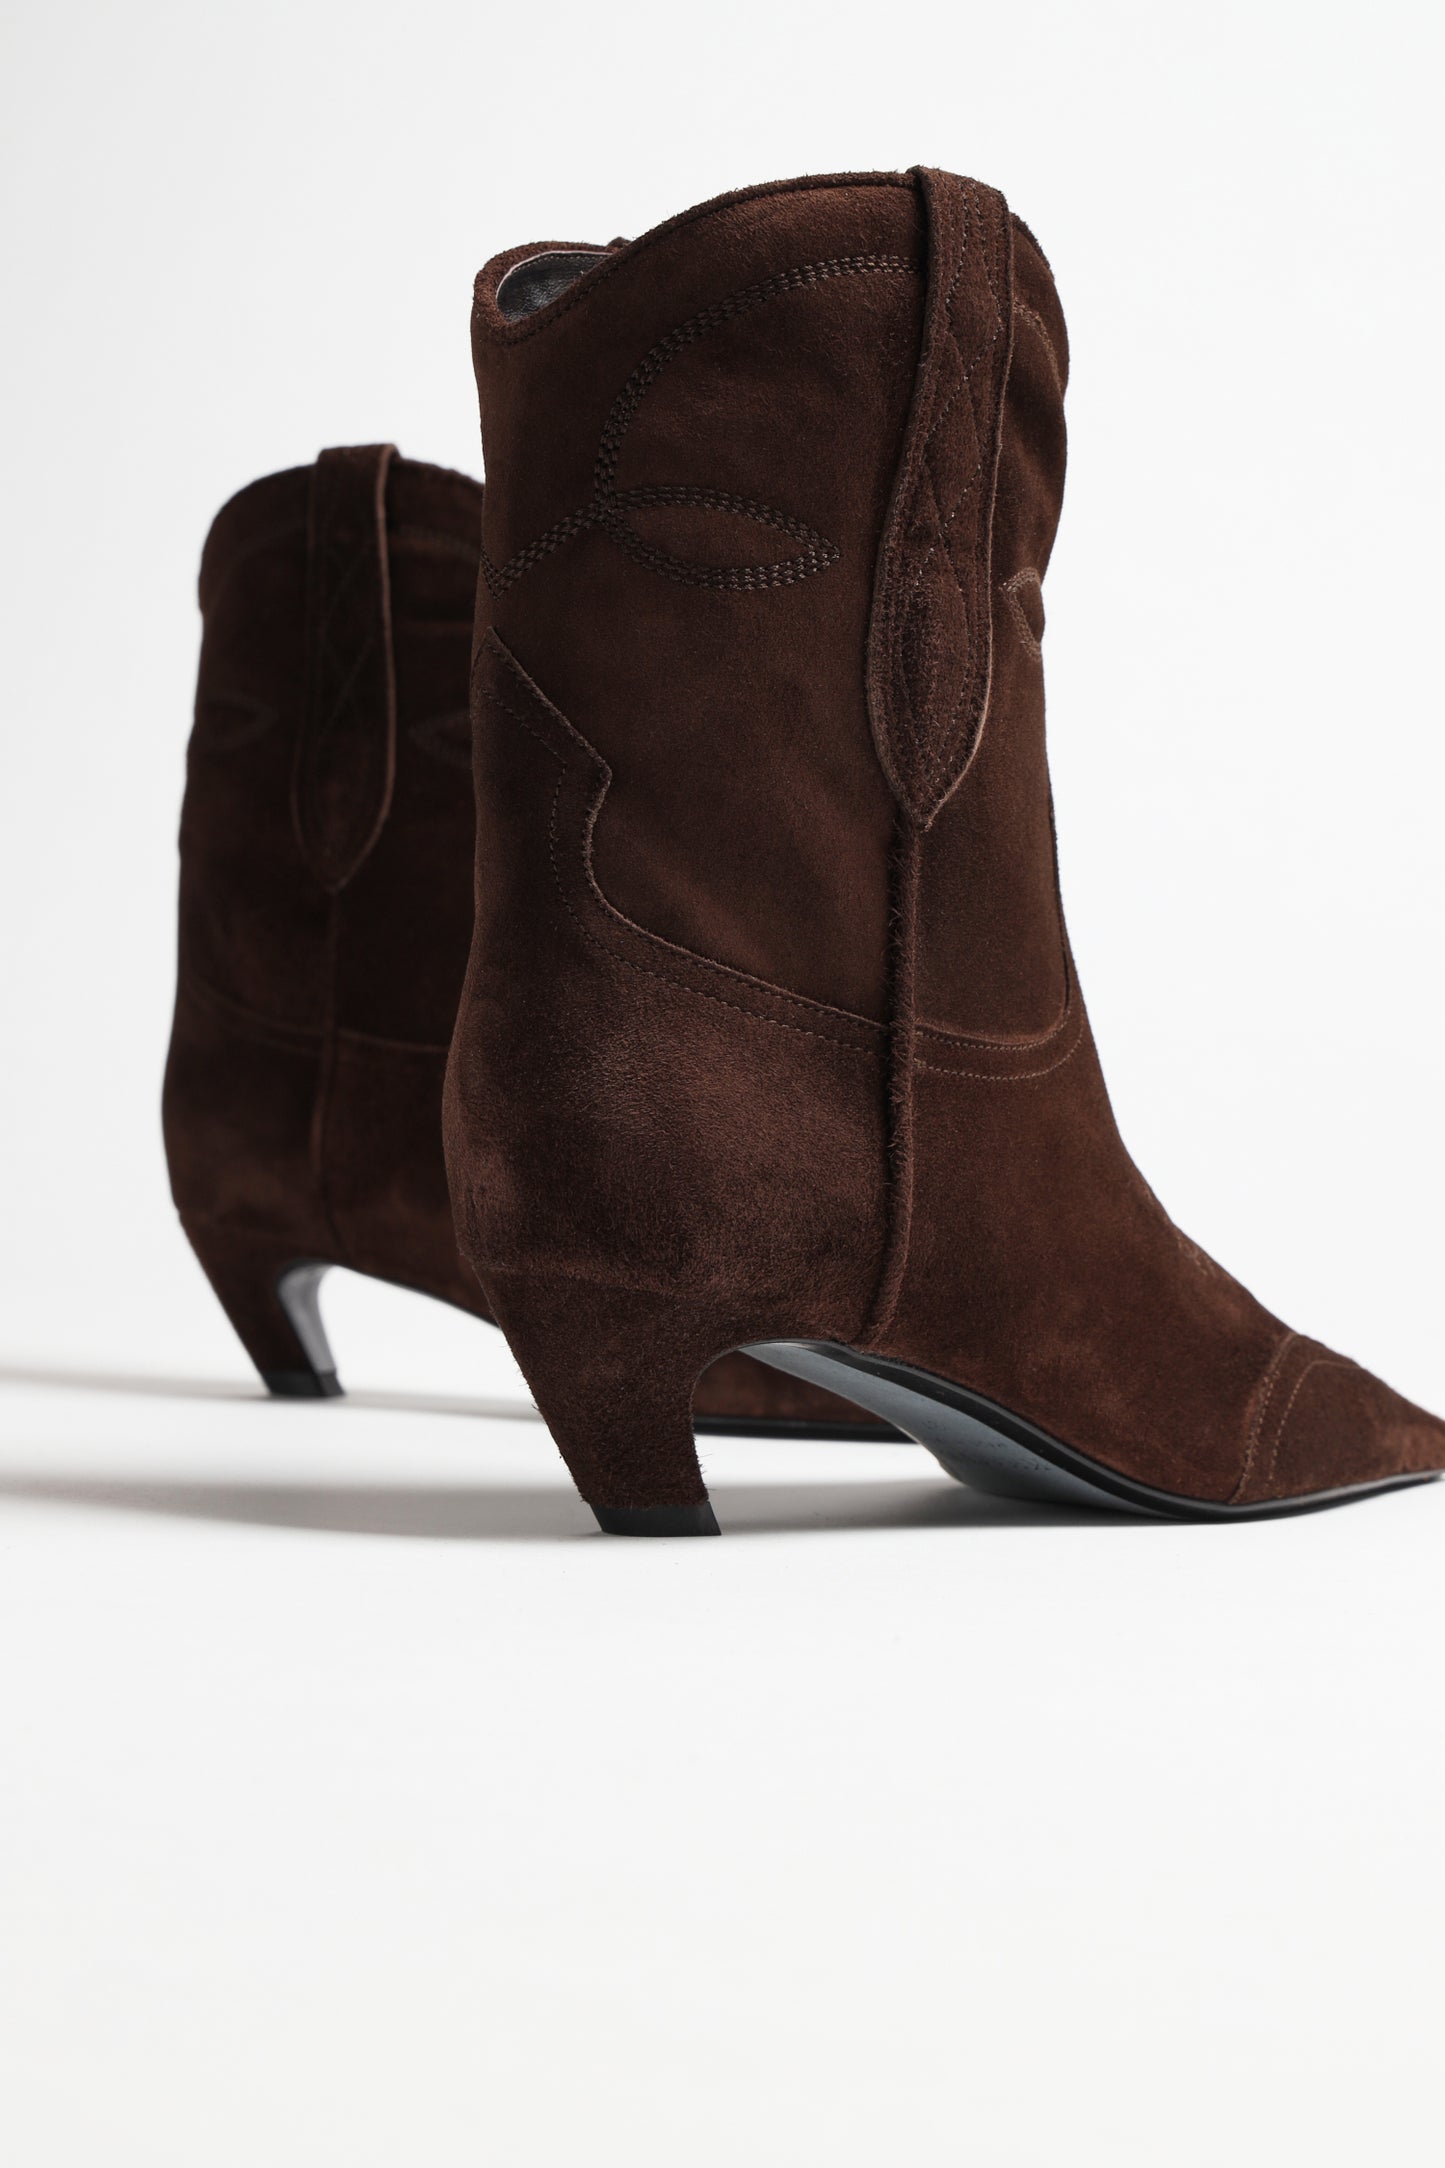 Ankle Boots Dallas in CoffeeKhaite - Anita Hass